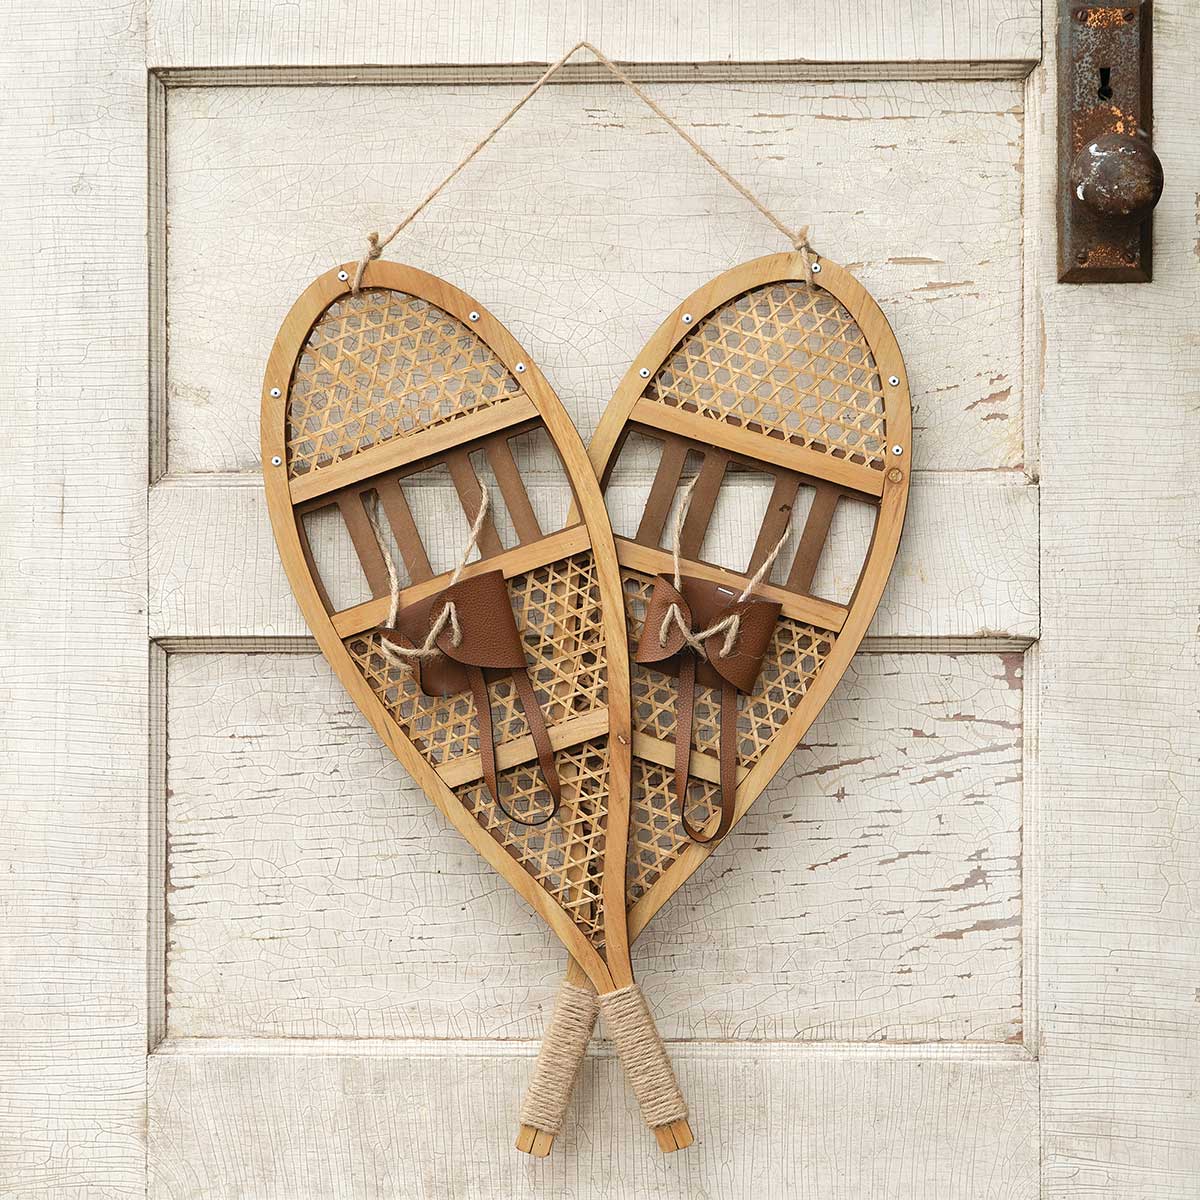 WOOD/WICKER SNOWSHOES NATURAL WITH JUTE HANGER